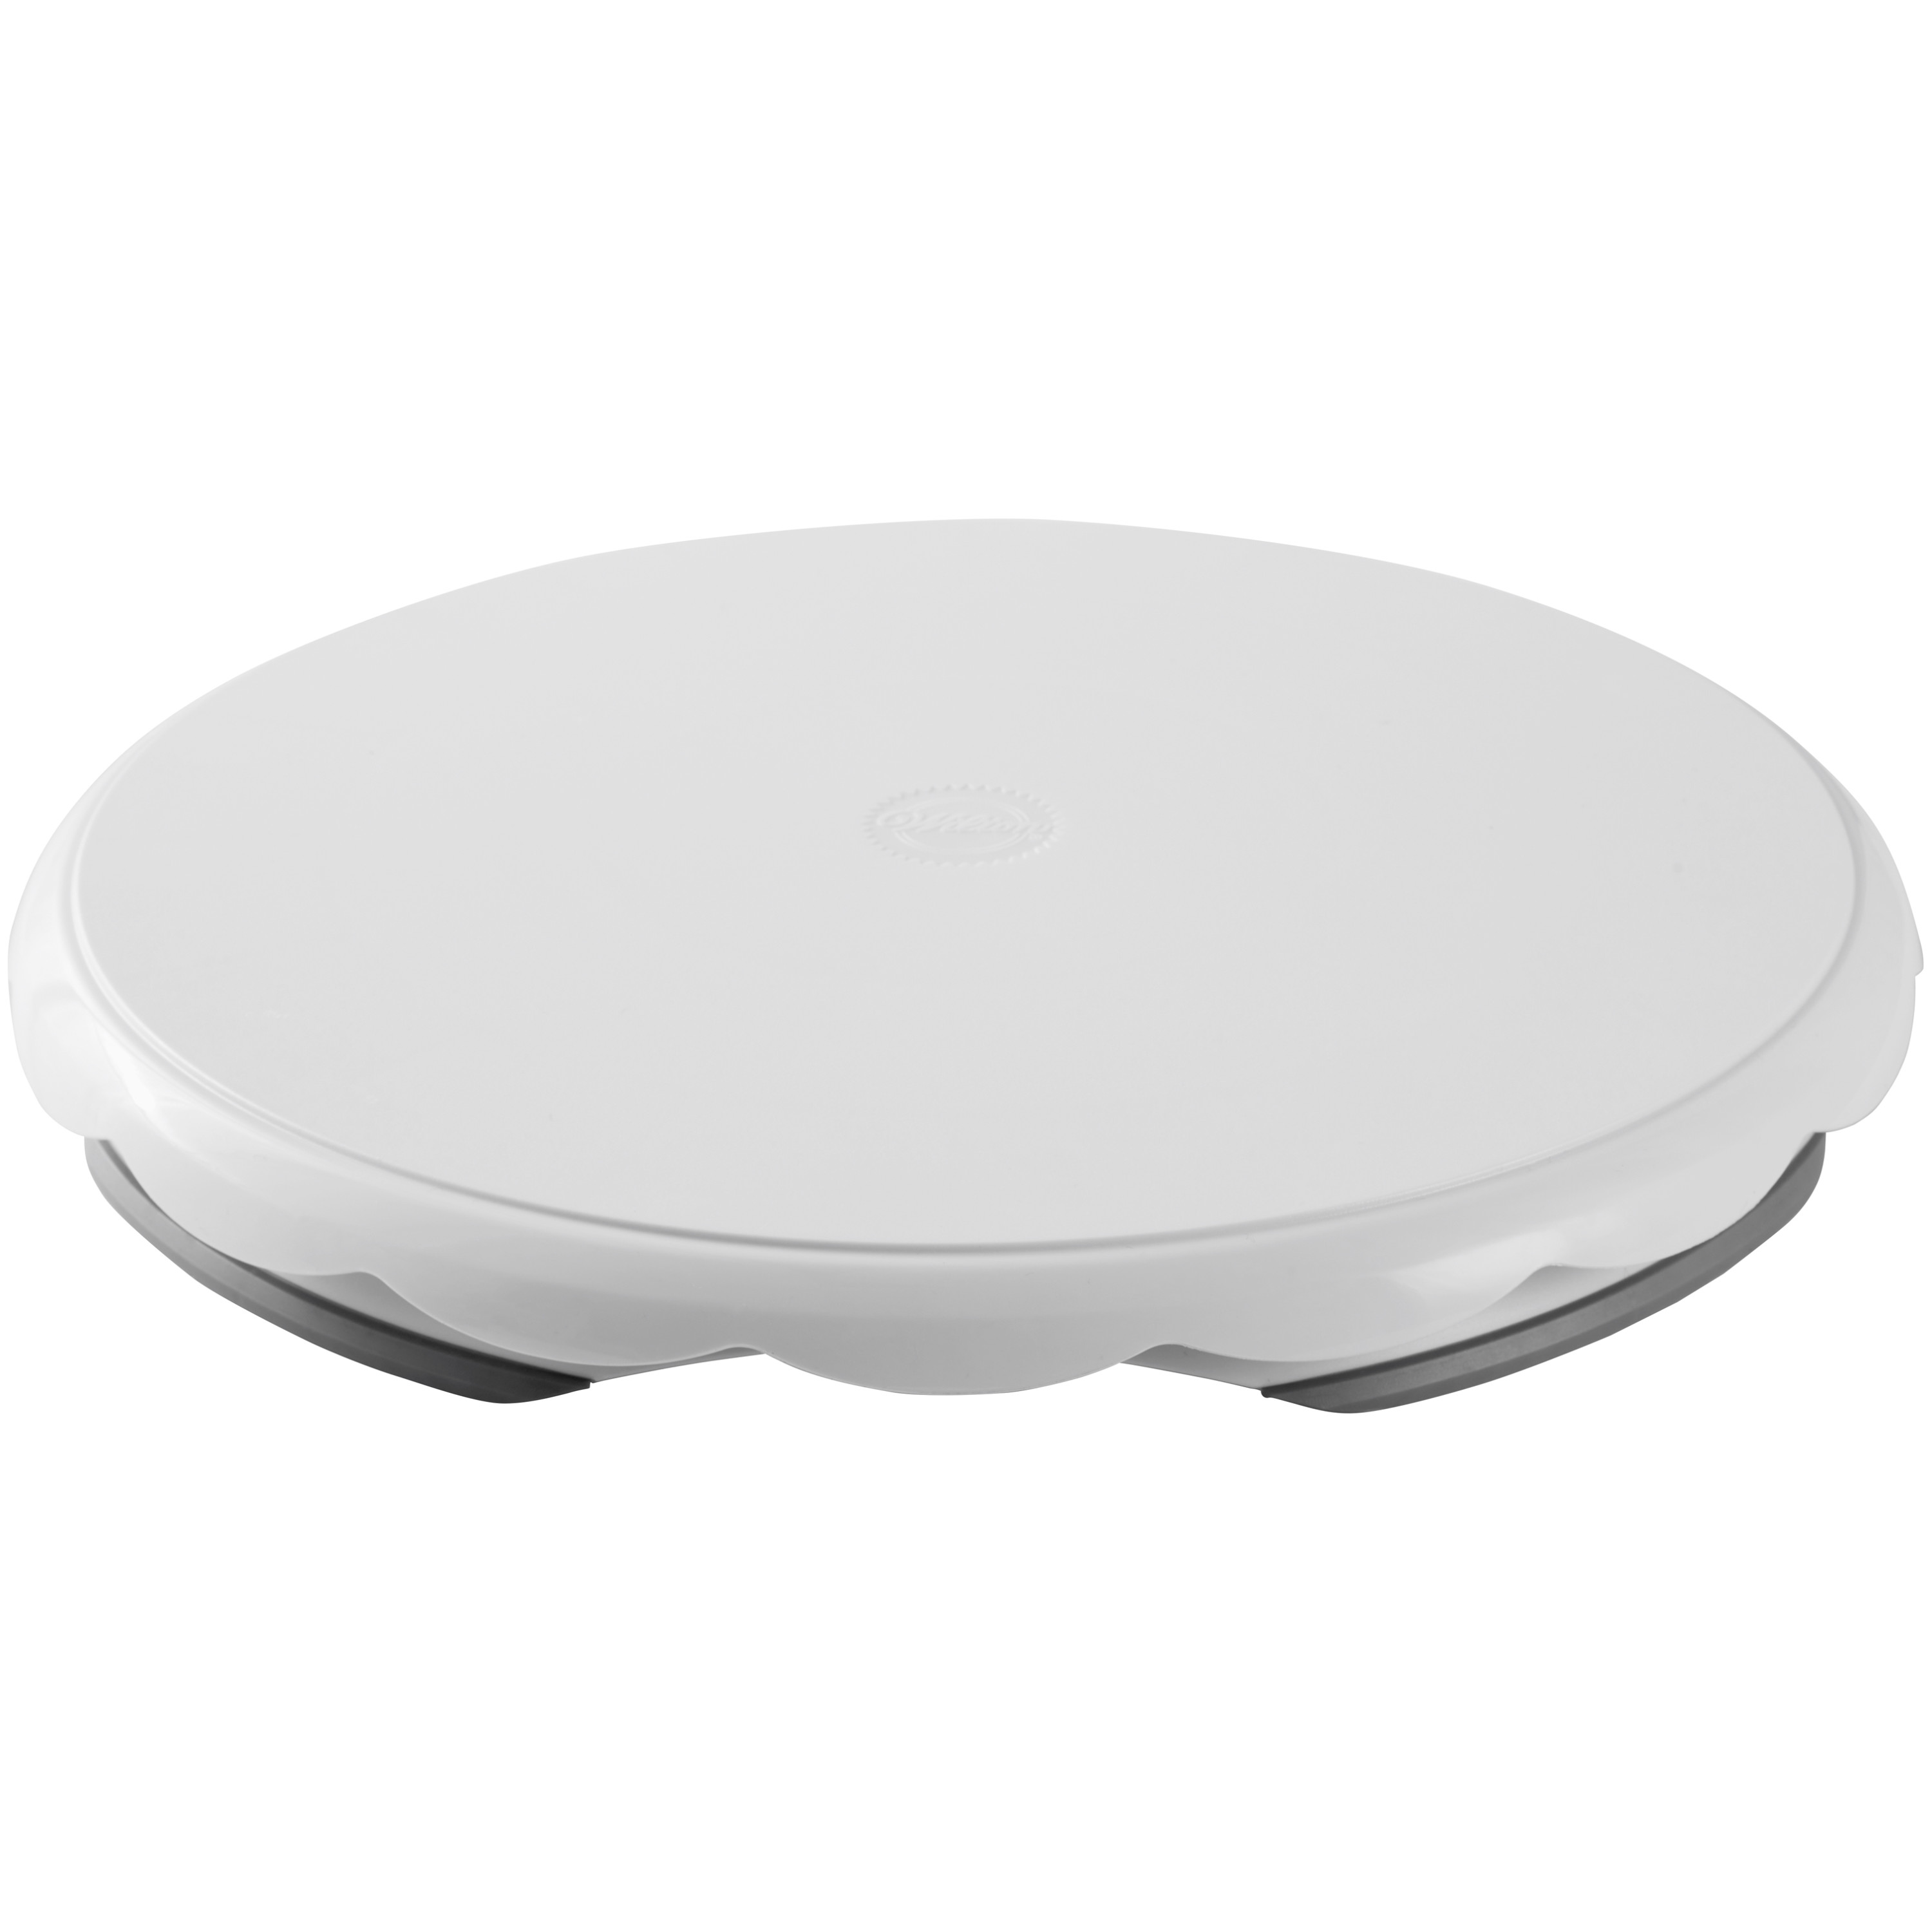 Wilton Round Decorating Turntable for Cake Decorating, Plastic, 12 inch - image 3 of 6